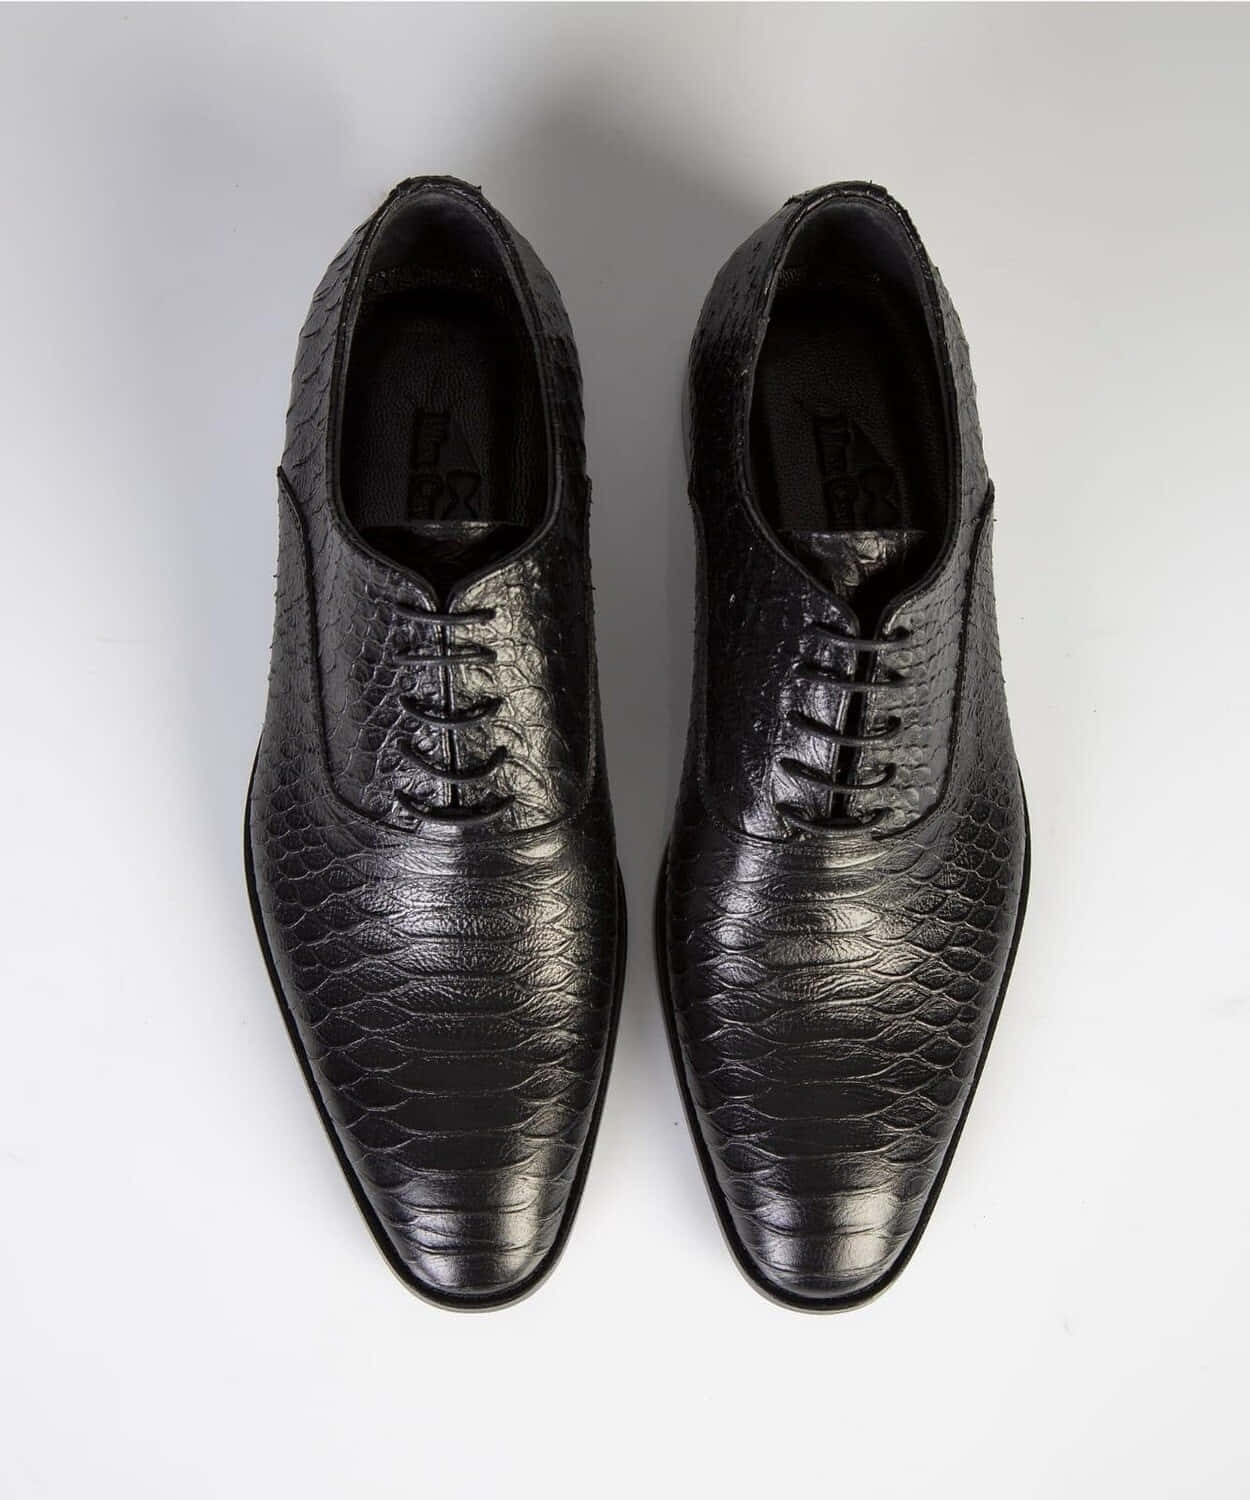 A Pair Of Black Crocodile Skin Shoes On A White Background